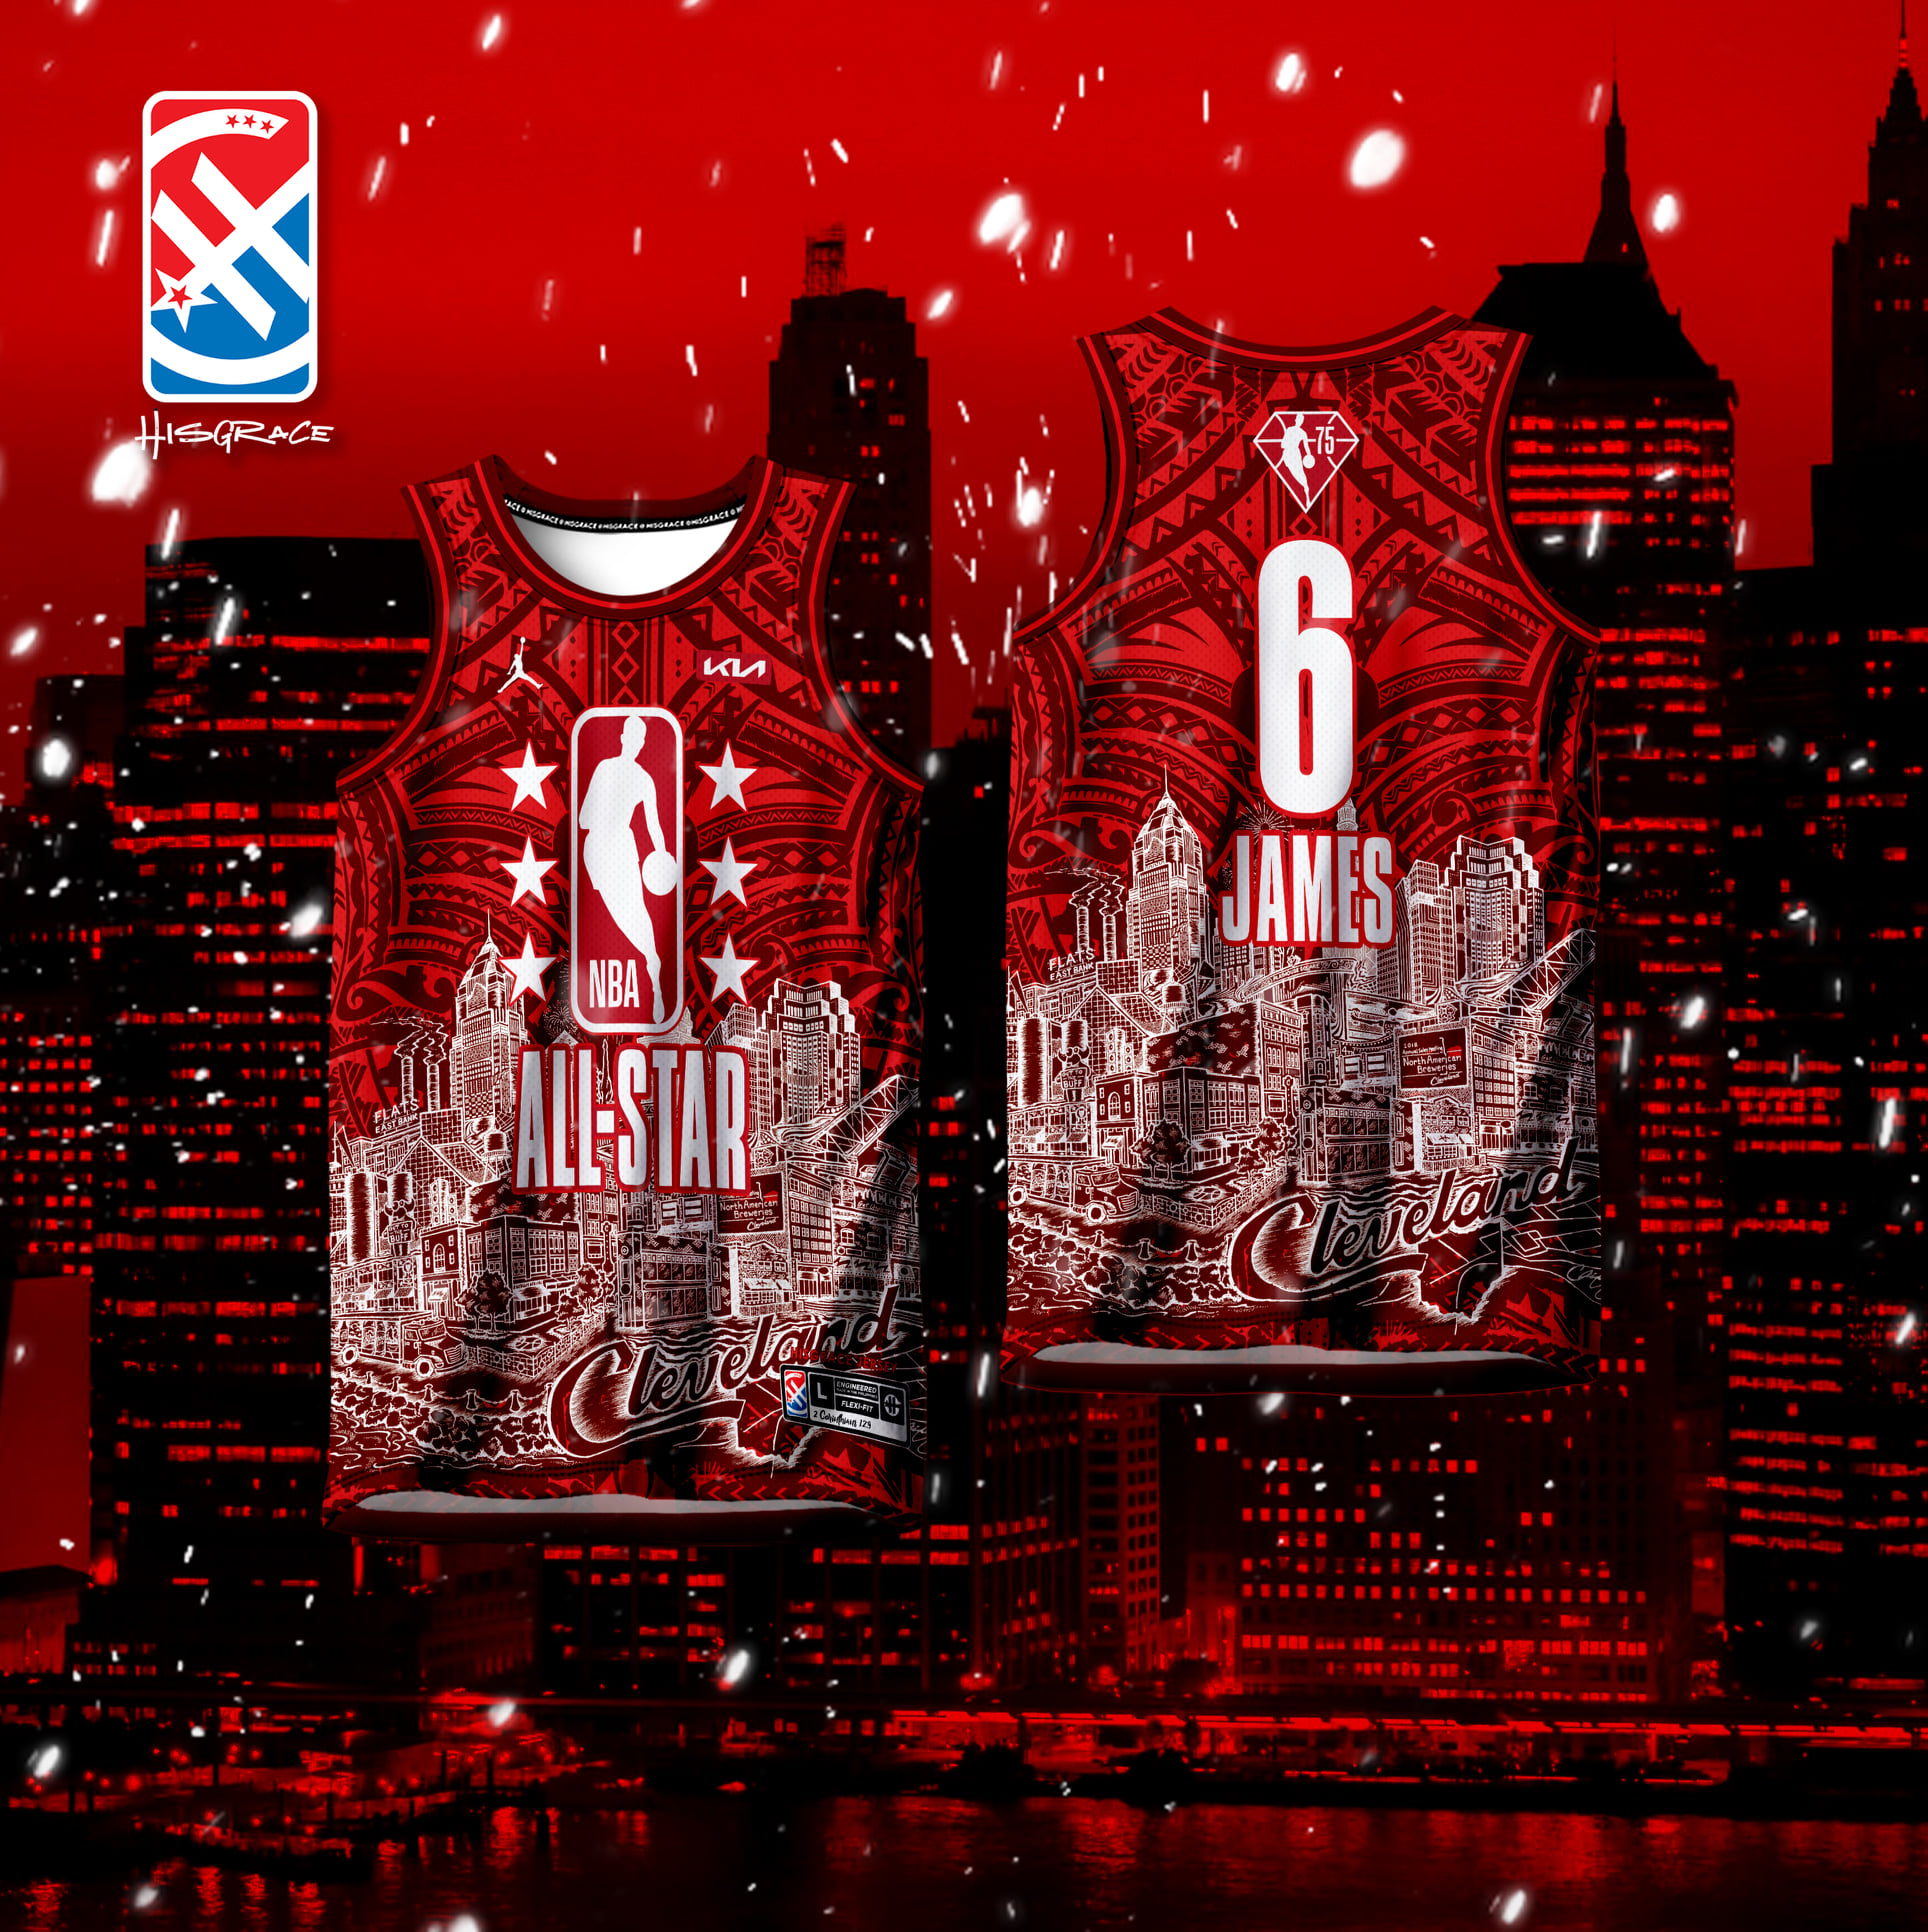 NBA ALL STAR BLUE RED JAMES HG JERSEY FULL SUBLIMATION